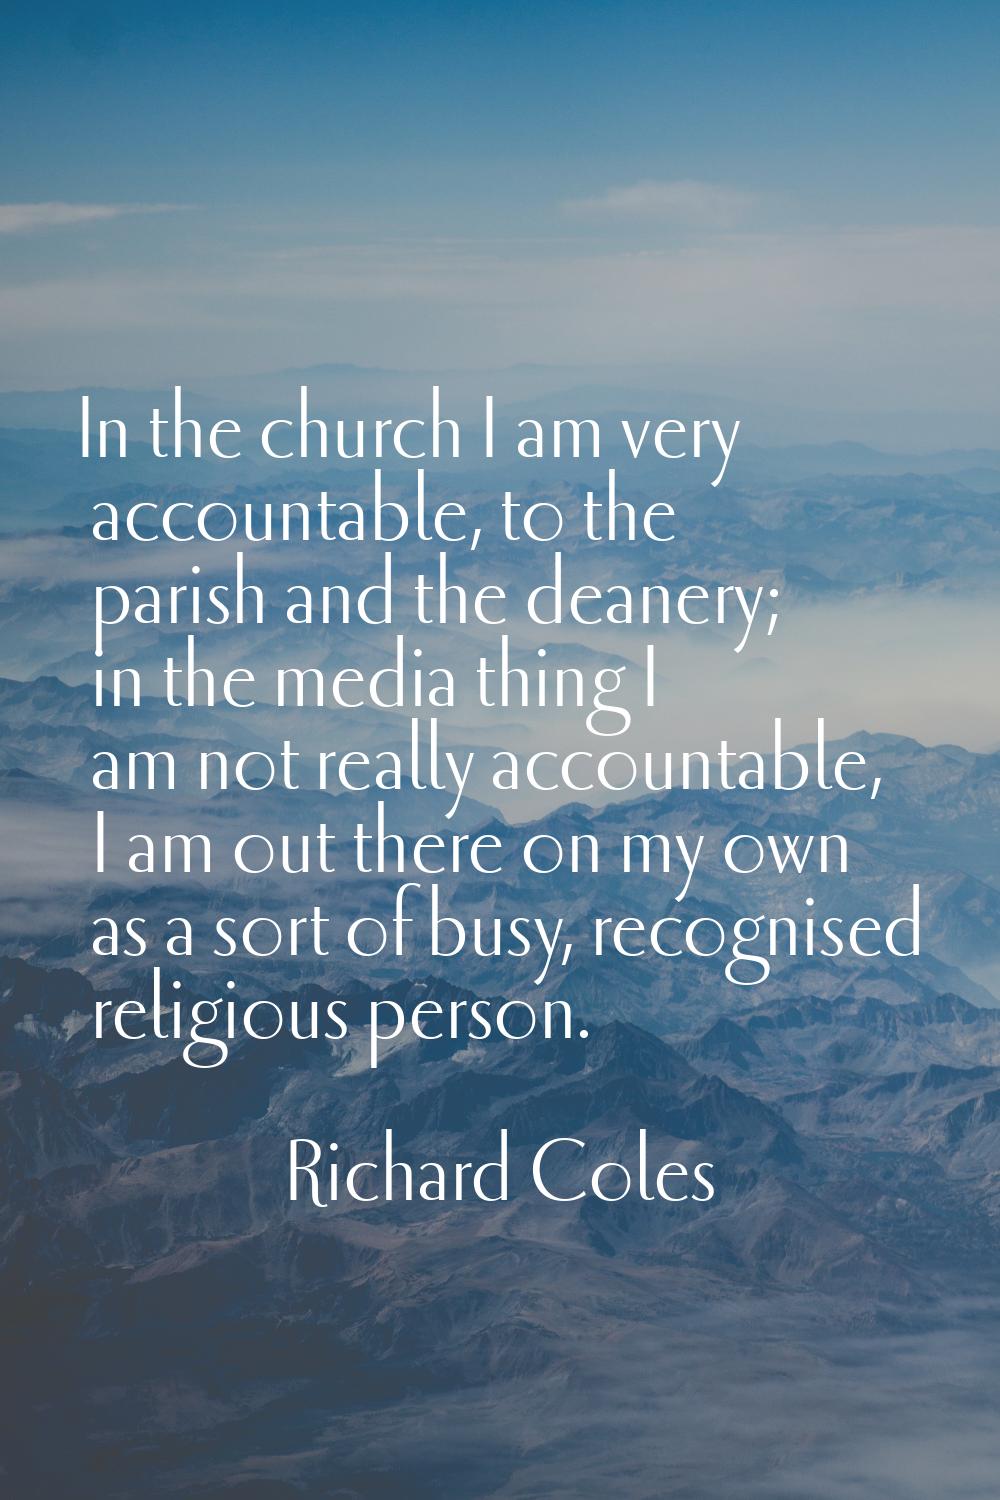 In the church I am very accountable, to the parish and the deanery; in the media thing I am not rea